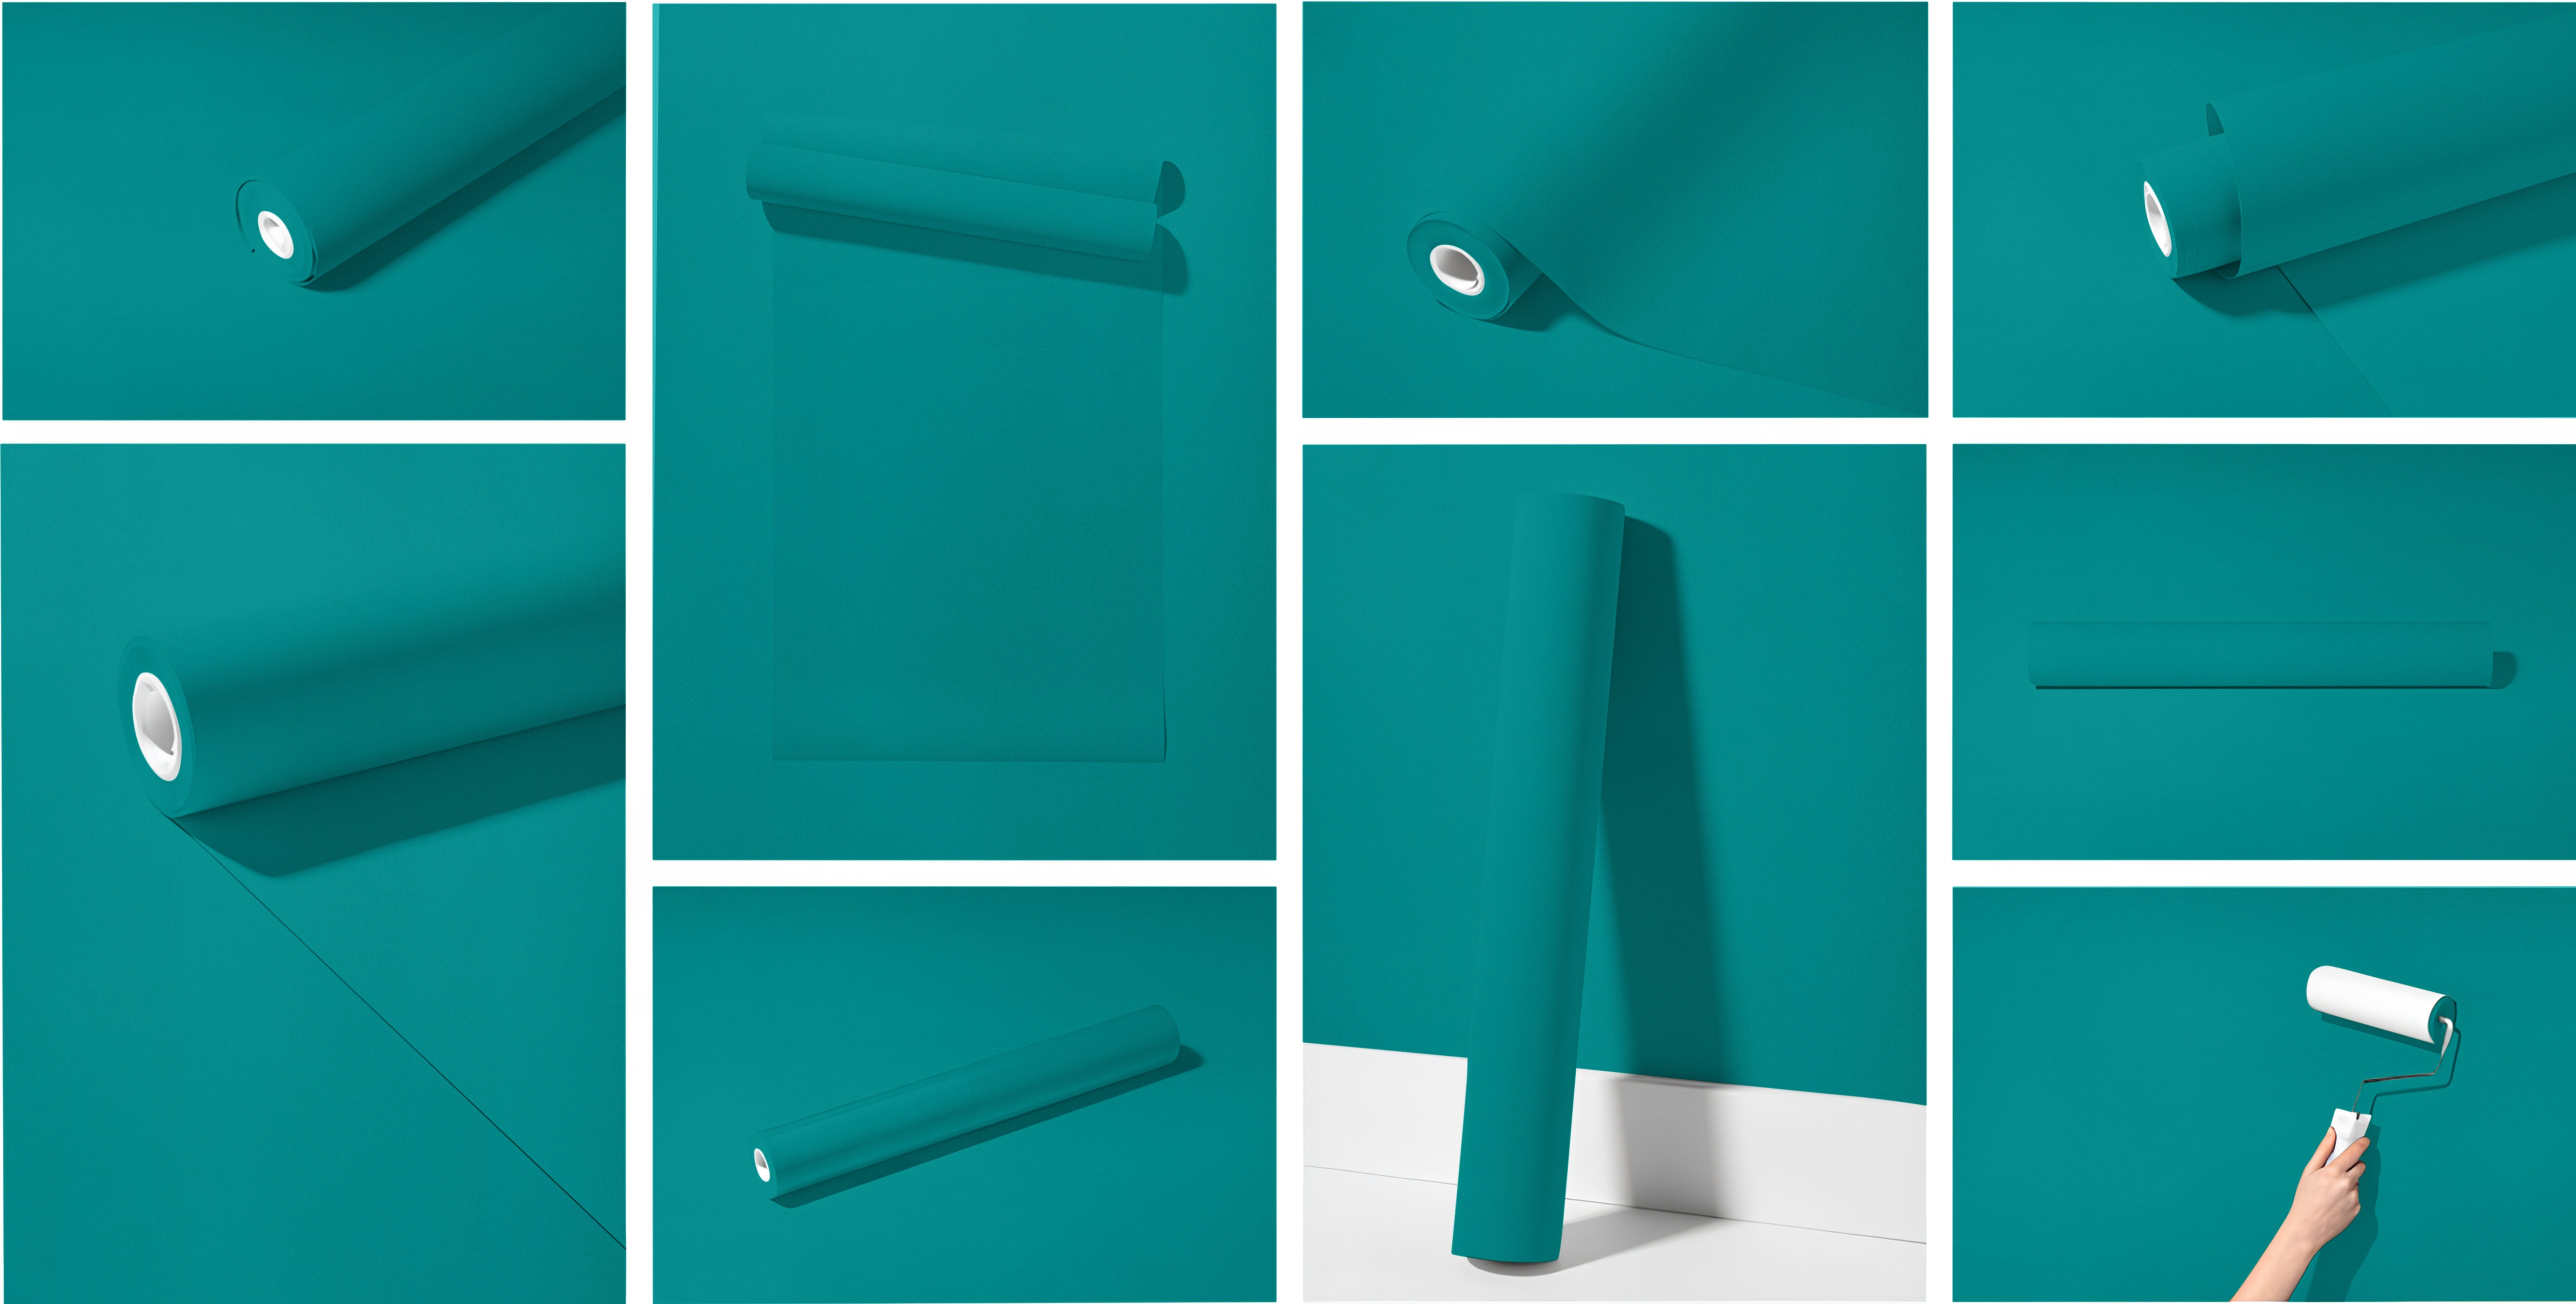 Peel & Stick Removable Re-usable Paint - Color RAL 5018 Turquoise Blue - offRAL™ - RALRAW LLC, USA